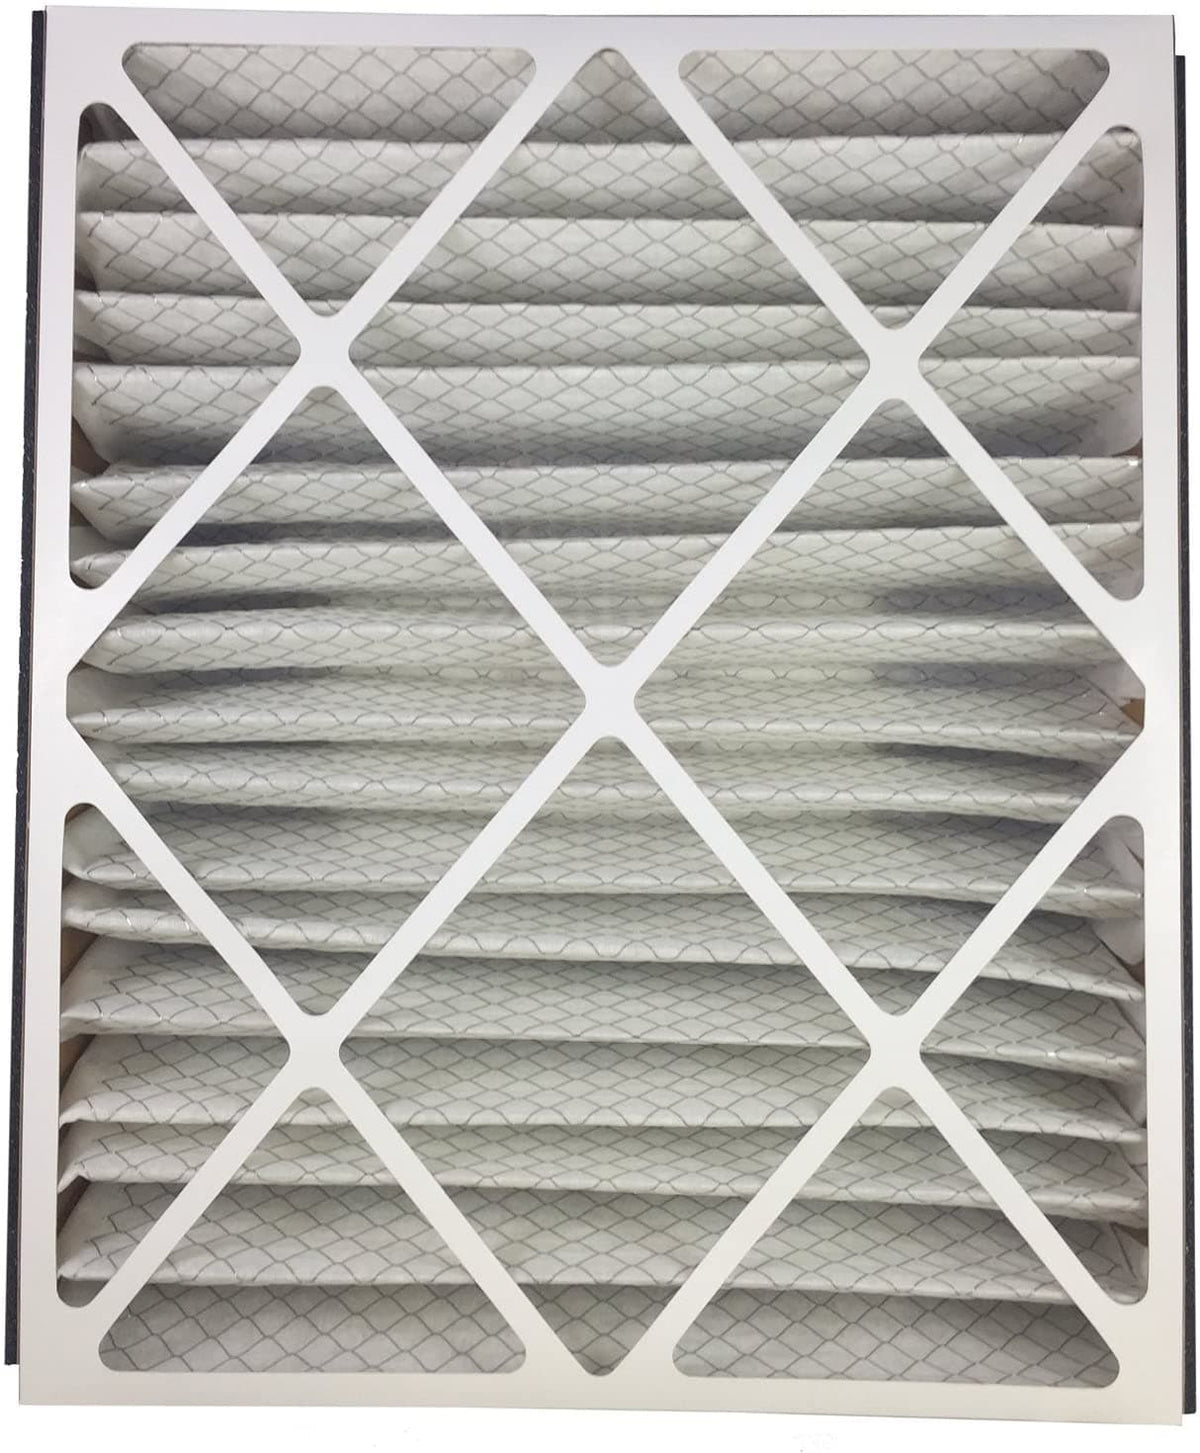 Atomic 259112-102 Trion Air Bear MERV 13 Compatible Replacement Filter - 20x25x5-2 Pack